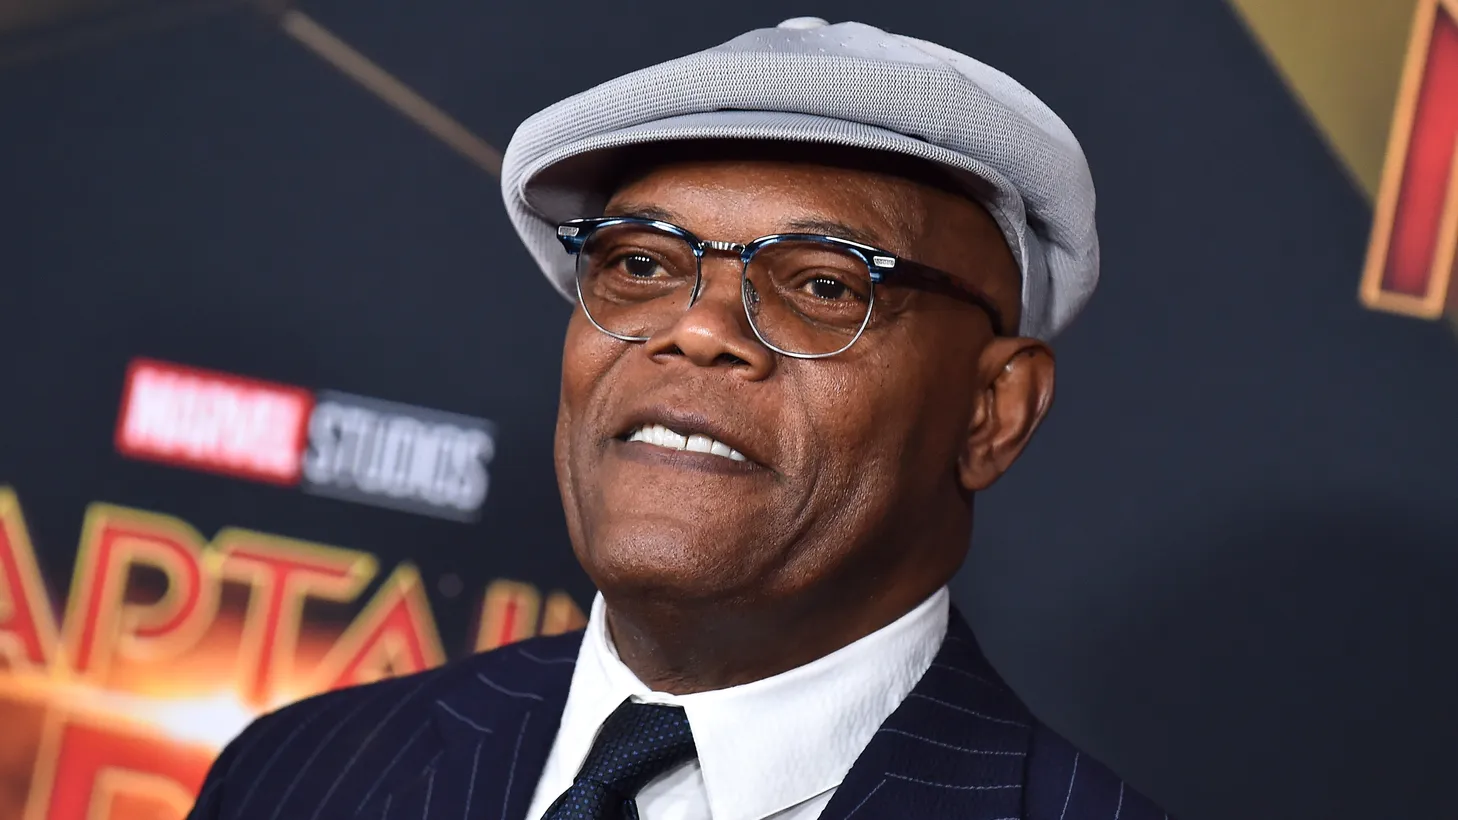 Samuel L. Jackson arrives for the “Captain Marvel” world premiere on March 4, 2019 in Hollywood, CA. He’s still one of the busiest actors in the industry, and his latest project is the Apple TV+ miniseries called “The Last Days of Ptolemy Grey.”